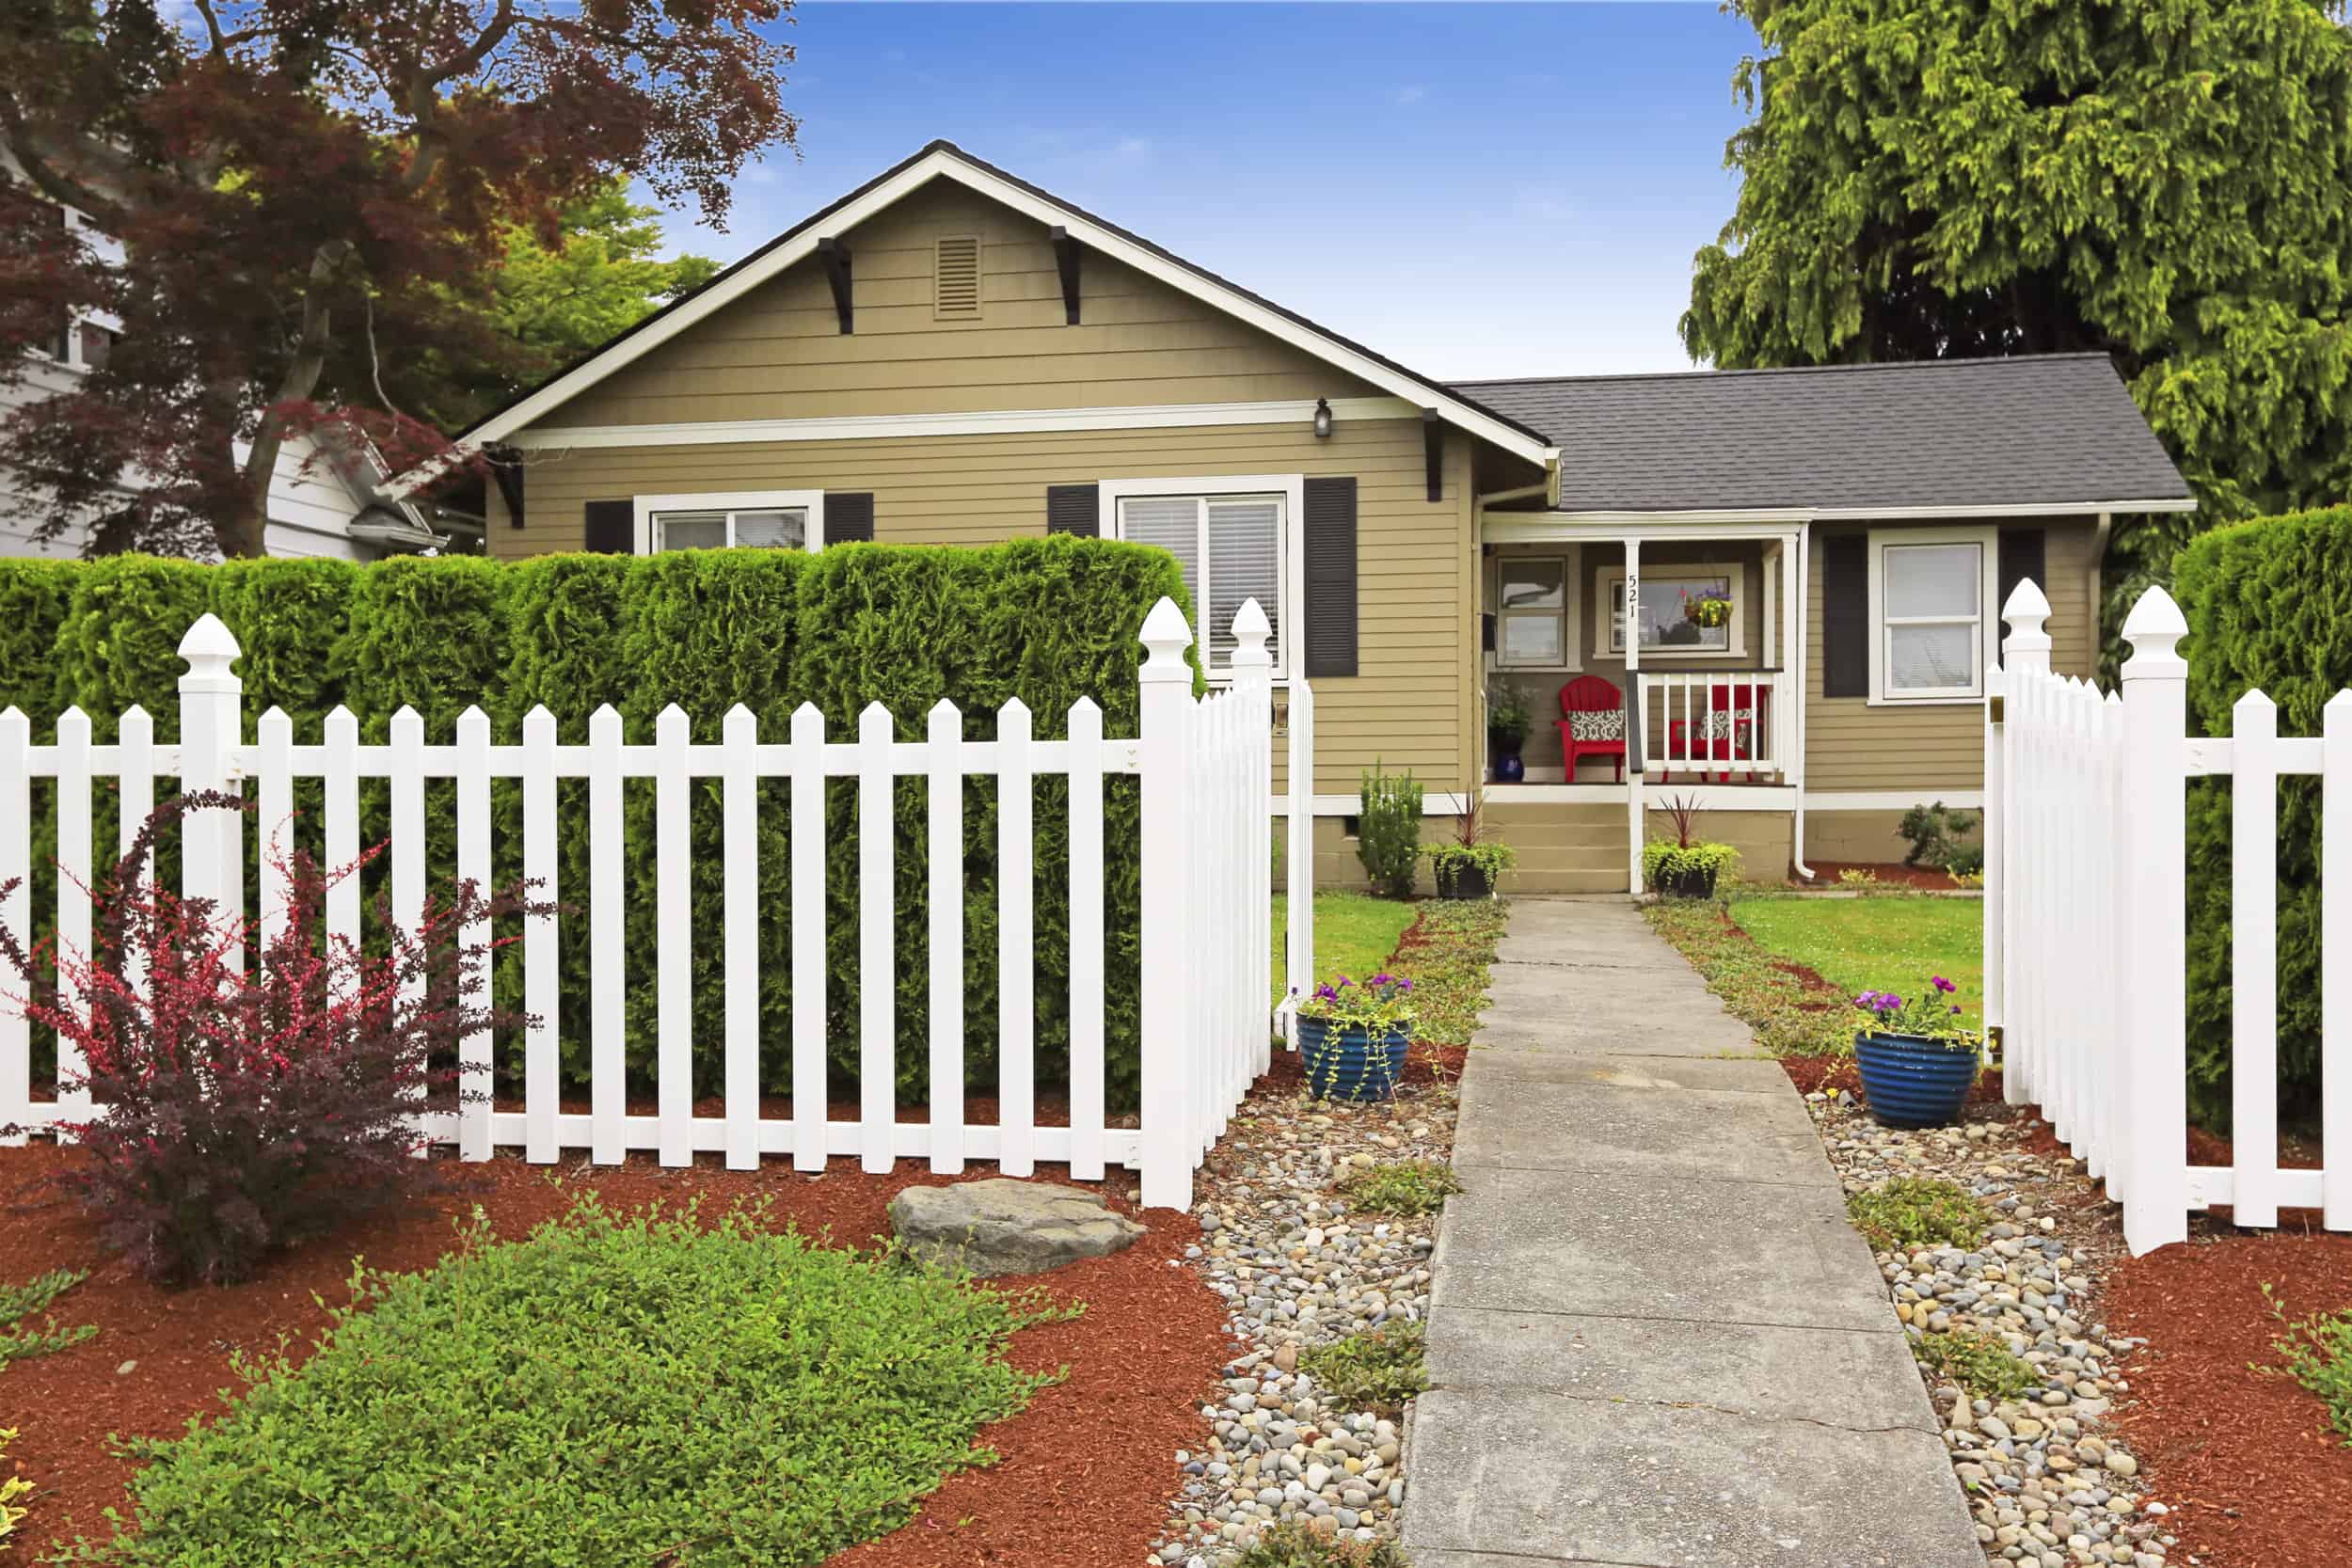 Do Fences Add Value To Your Home?